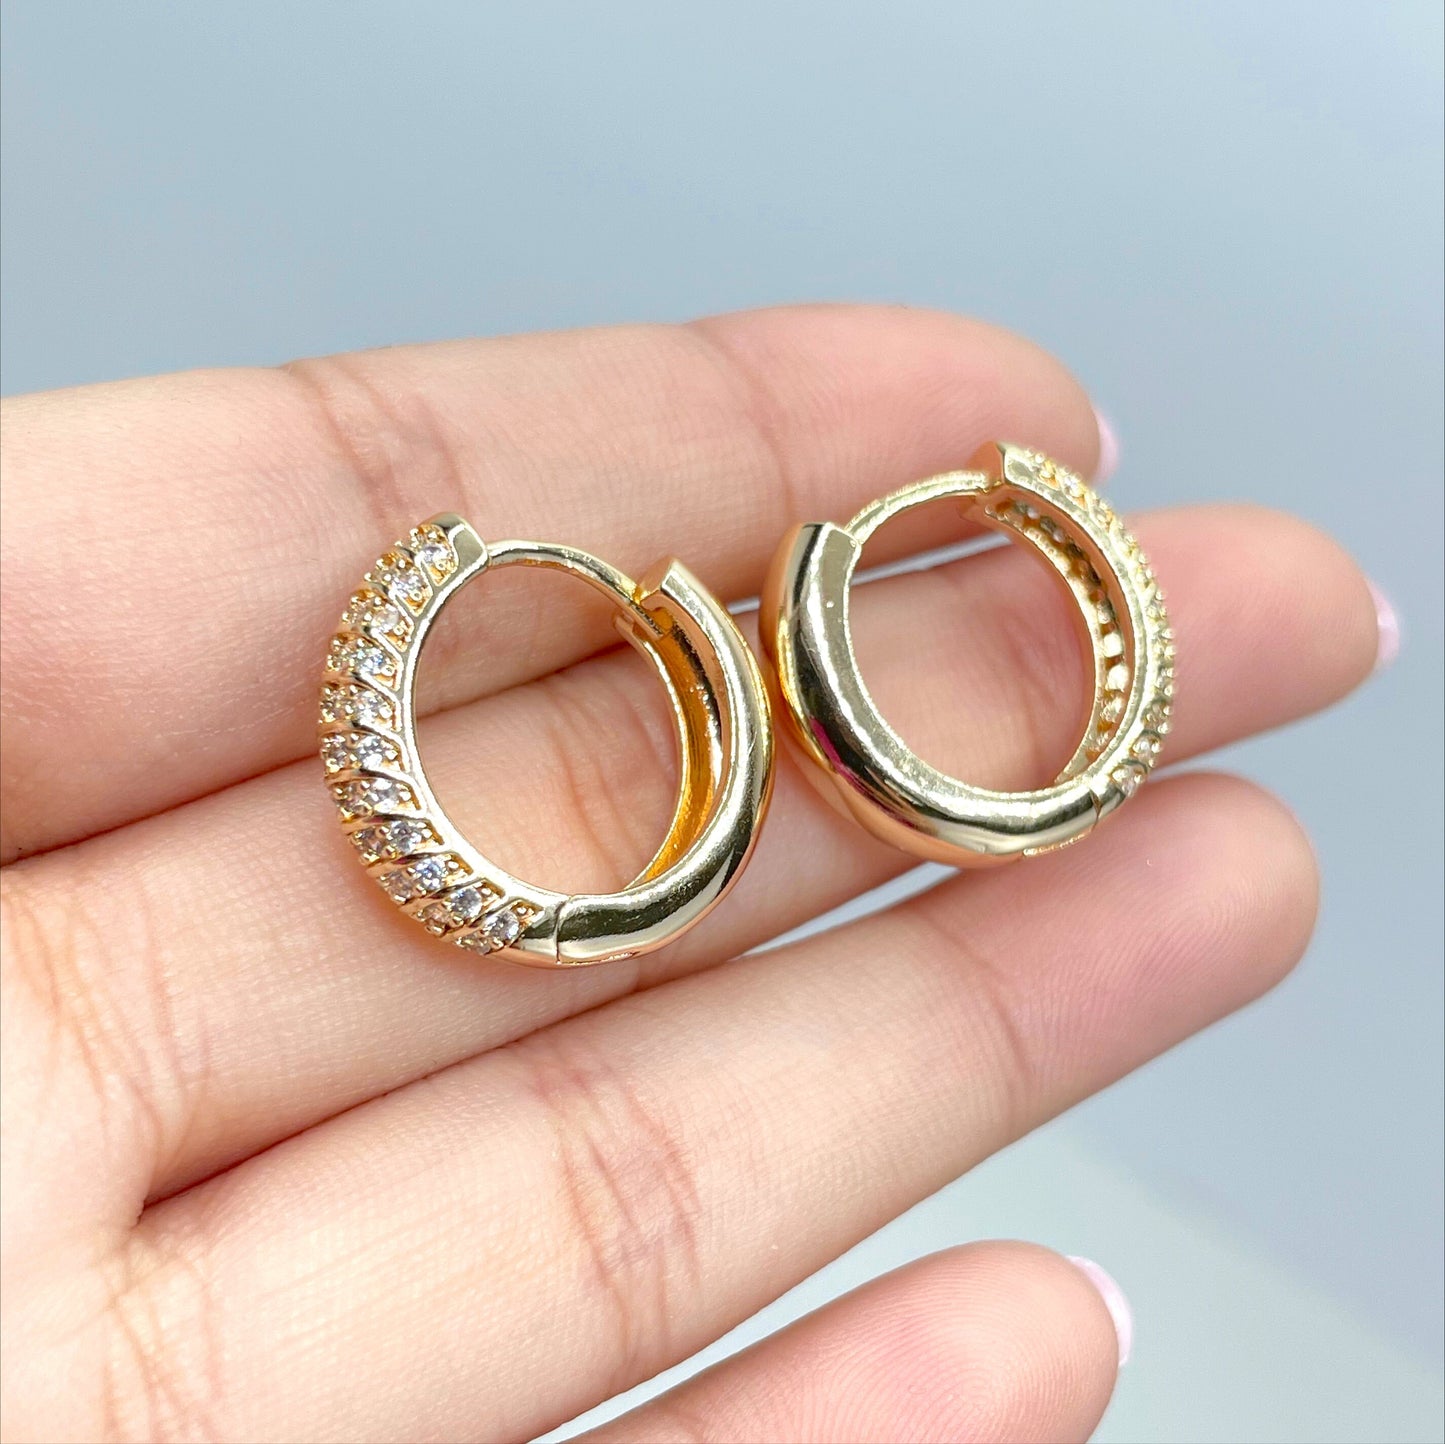 18k Gold Filled with Micro Cubic Zirconia, 20mm Huggie Hoop Earrings, 5mm Thickness, Wholesale Jewelry Making Supplies